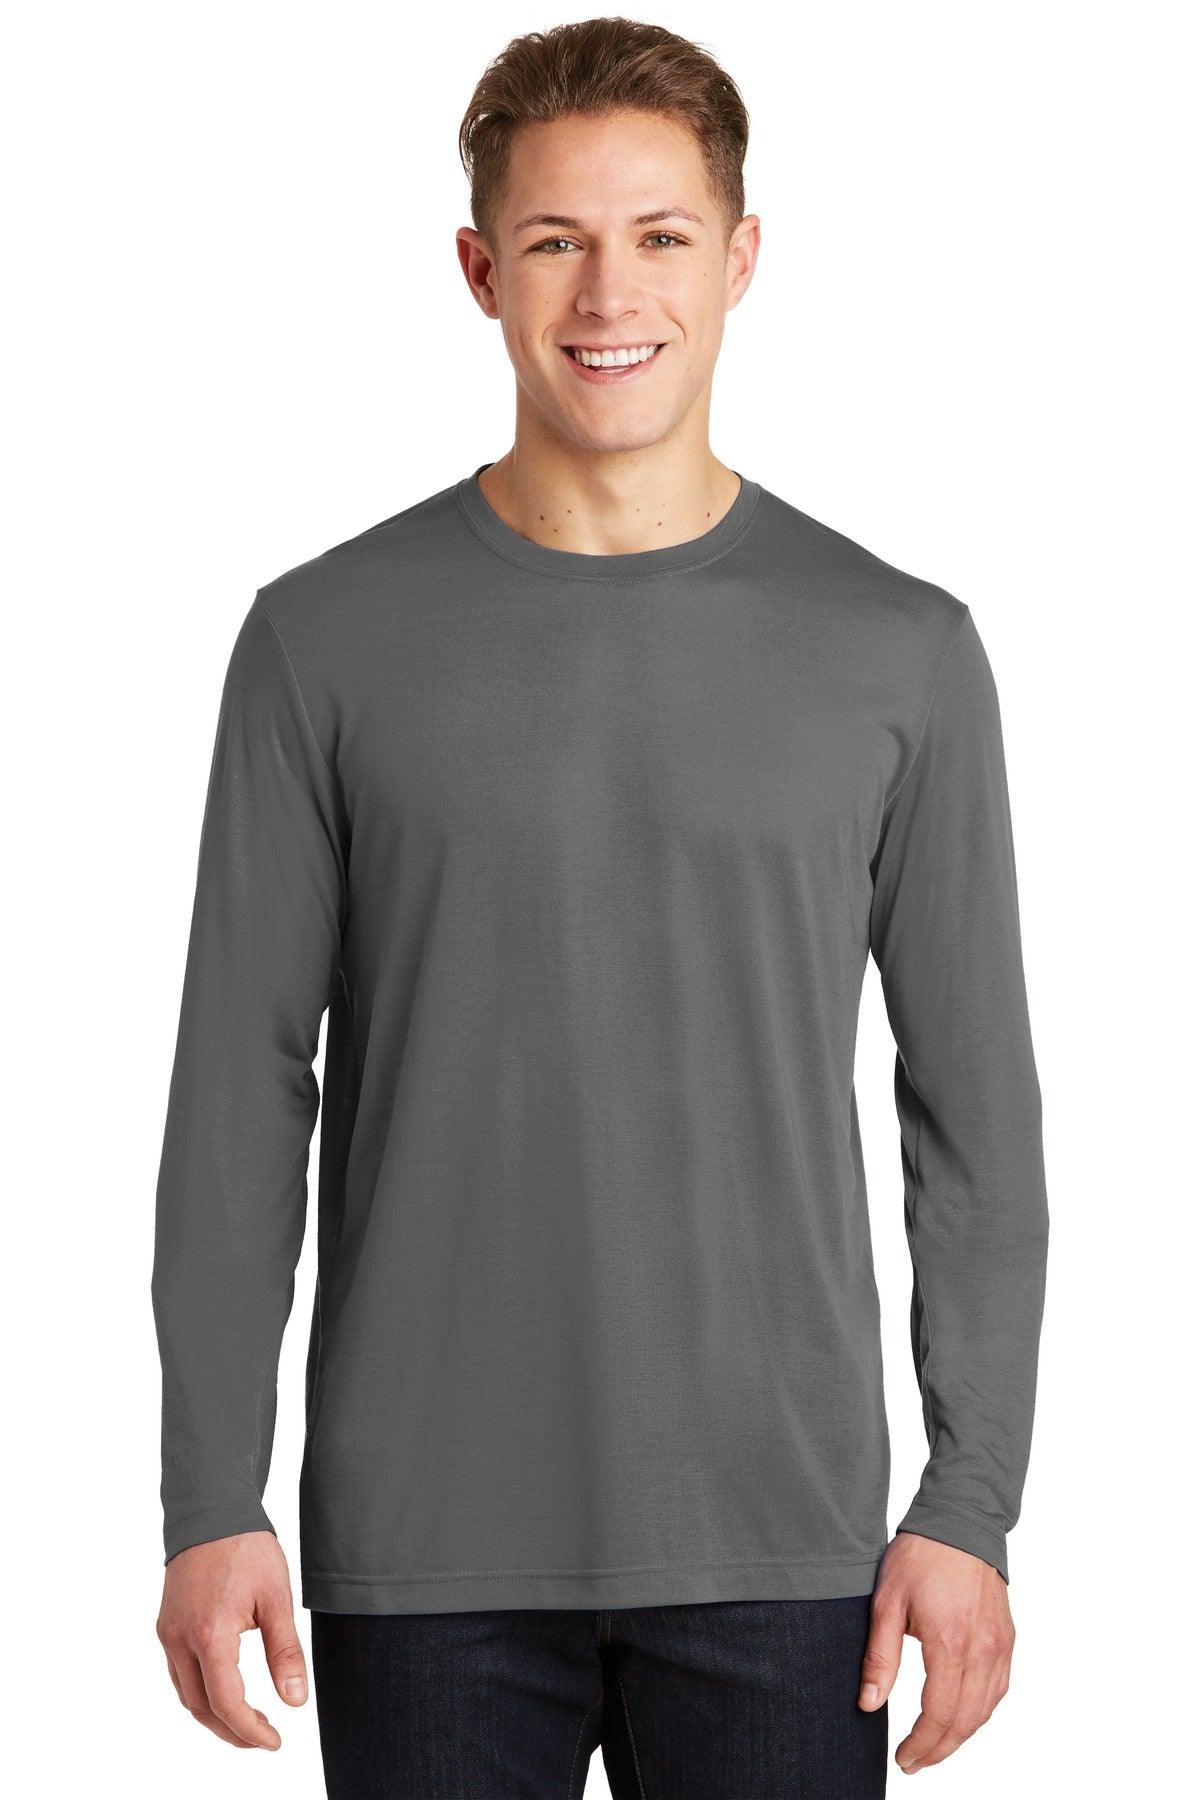 Sport-Tek Long Sleeve PosiCharge Competitor Cotton Touch Tee. ST450LS - Dresses Max